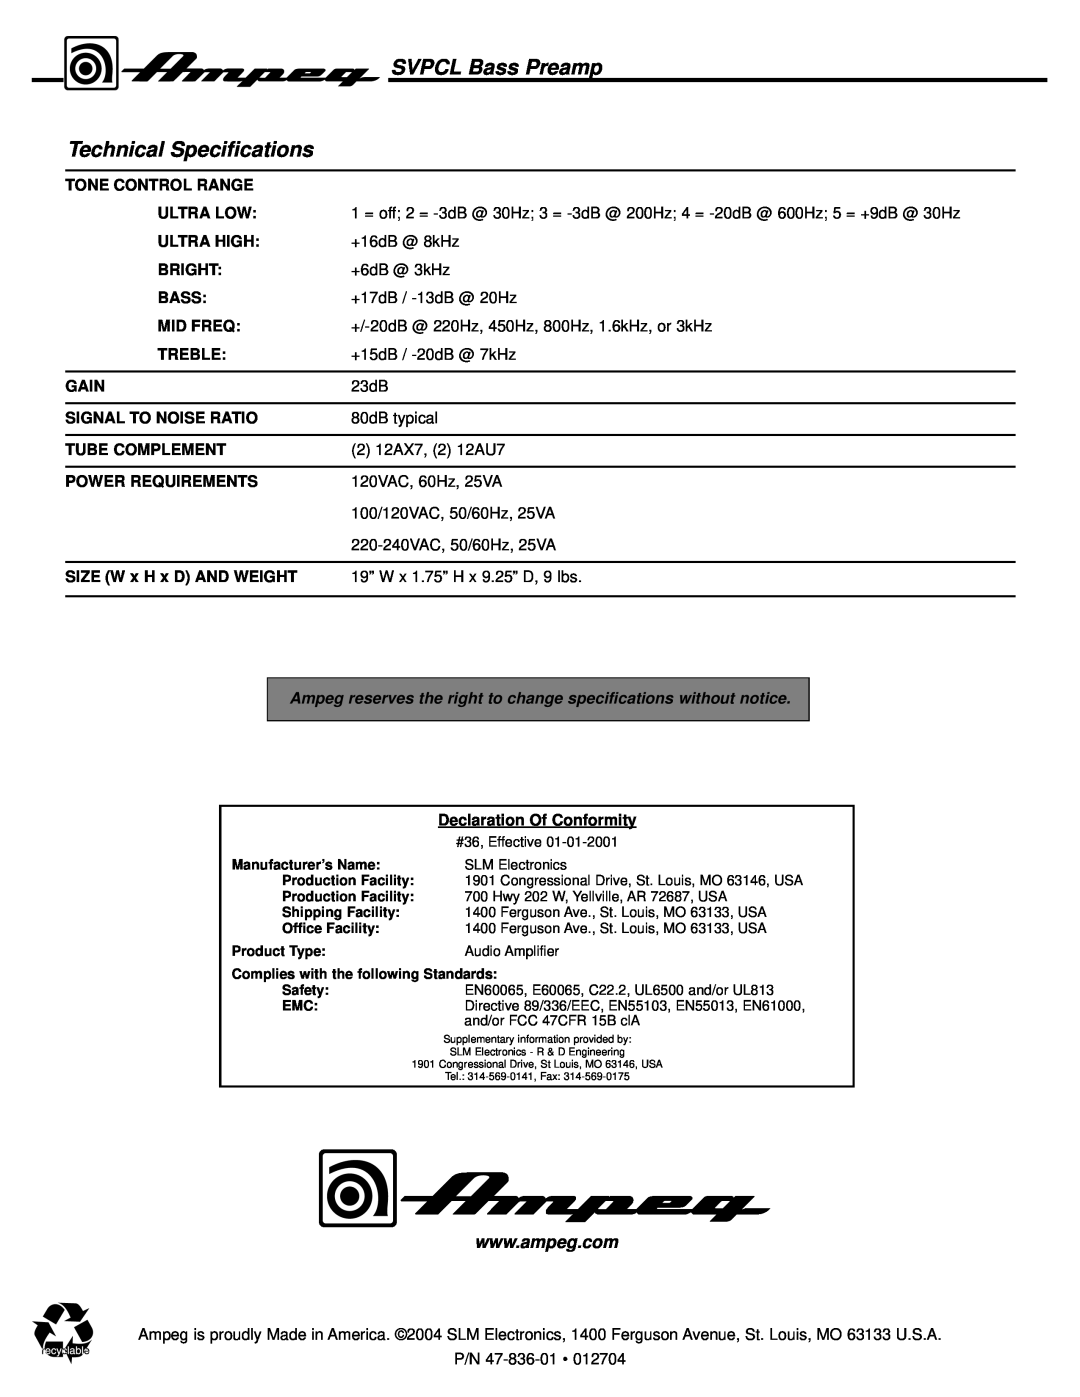 Ampeg manual Technical Specifications, SVPCL Bass Preamp 